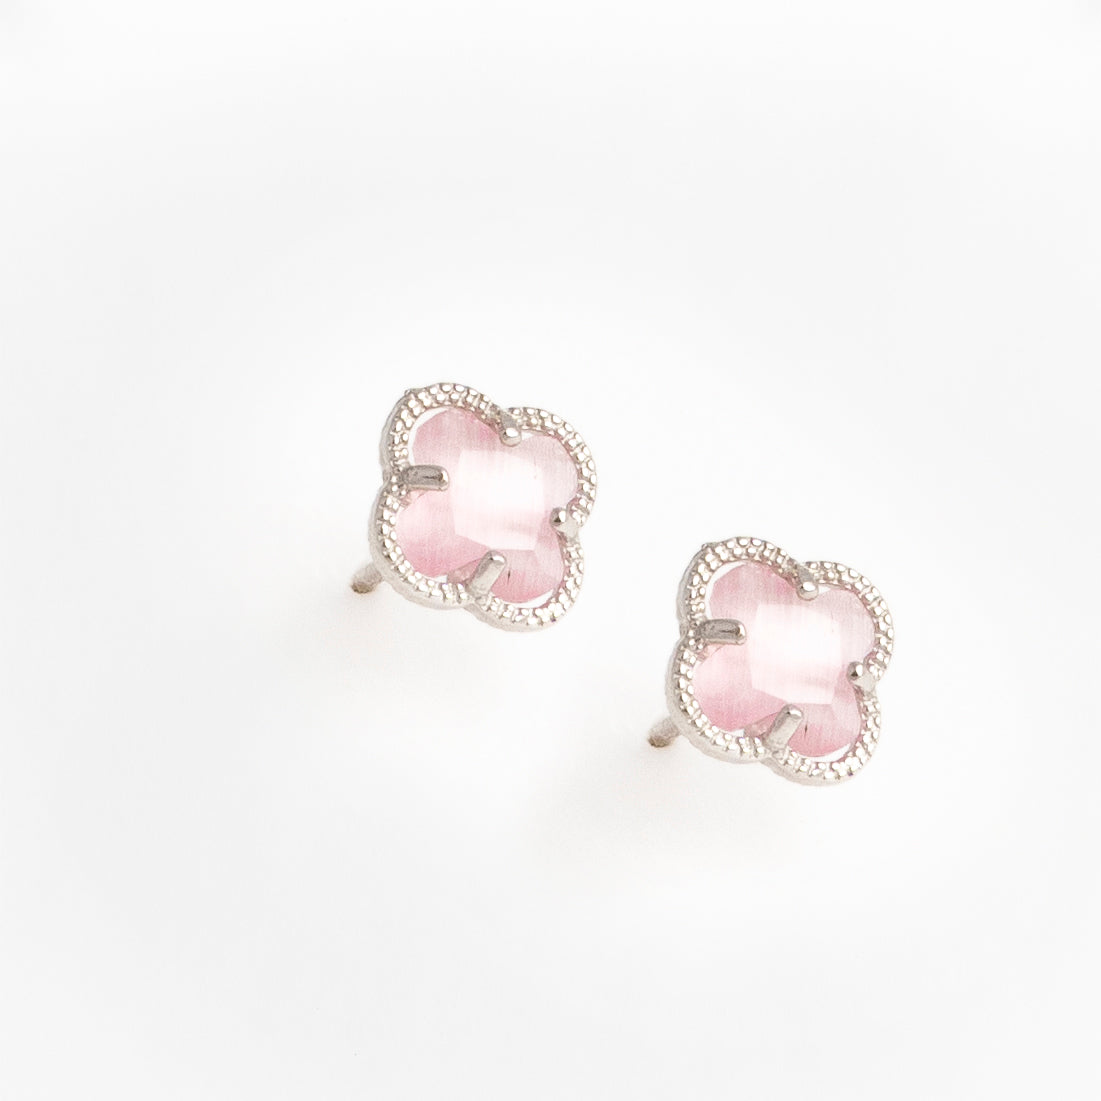 CLOVER Silver Earrings with Pink Quartz